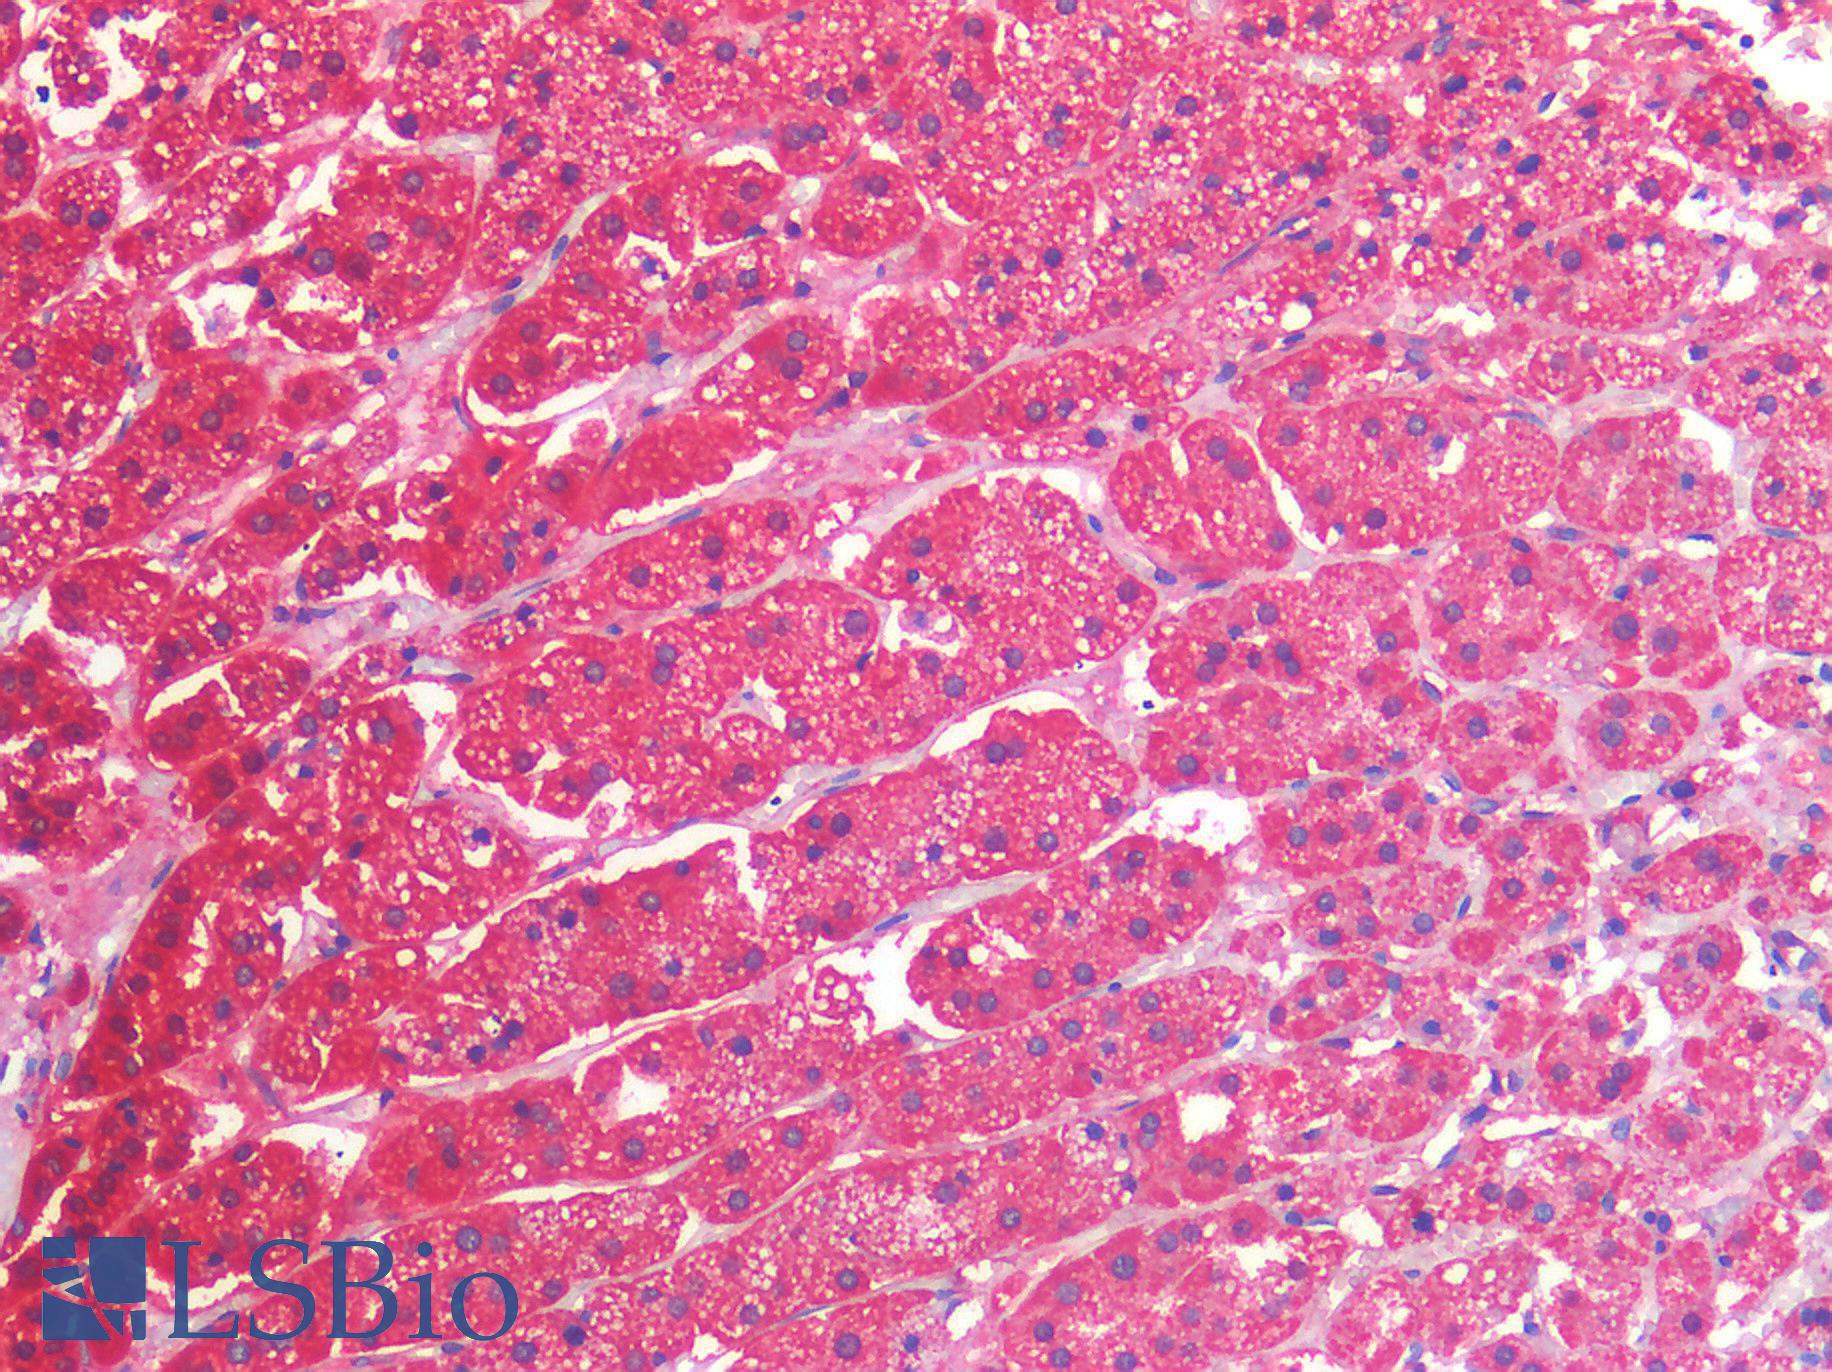 PPIF / Cyclophilin F Antibody - Human Adrenal: Formalin-Fixed, Paraffin-Embedded (FFPE)